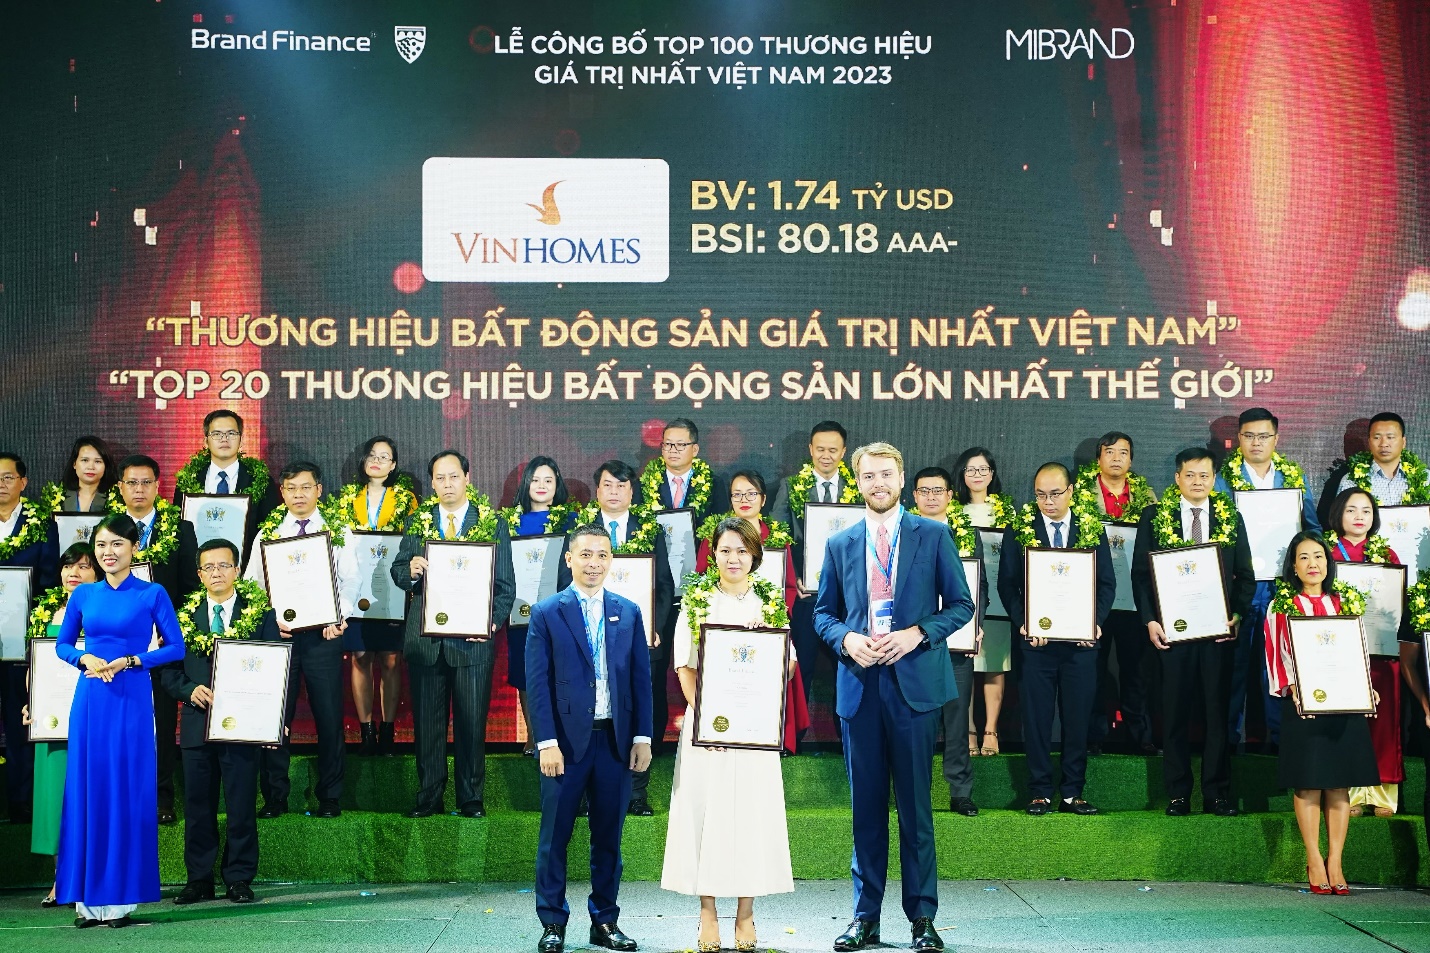 Vinhomes has been honored as one of the world's top 20 most valued real estate brands